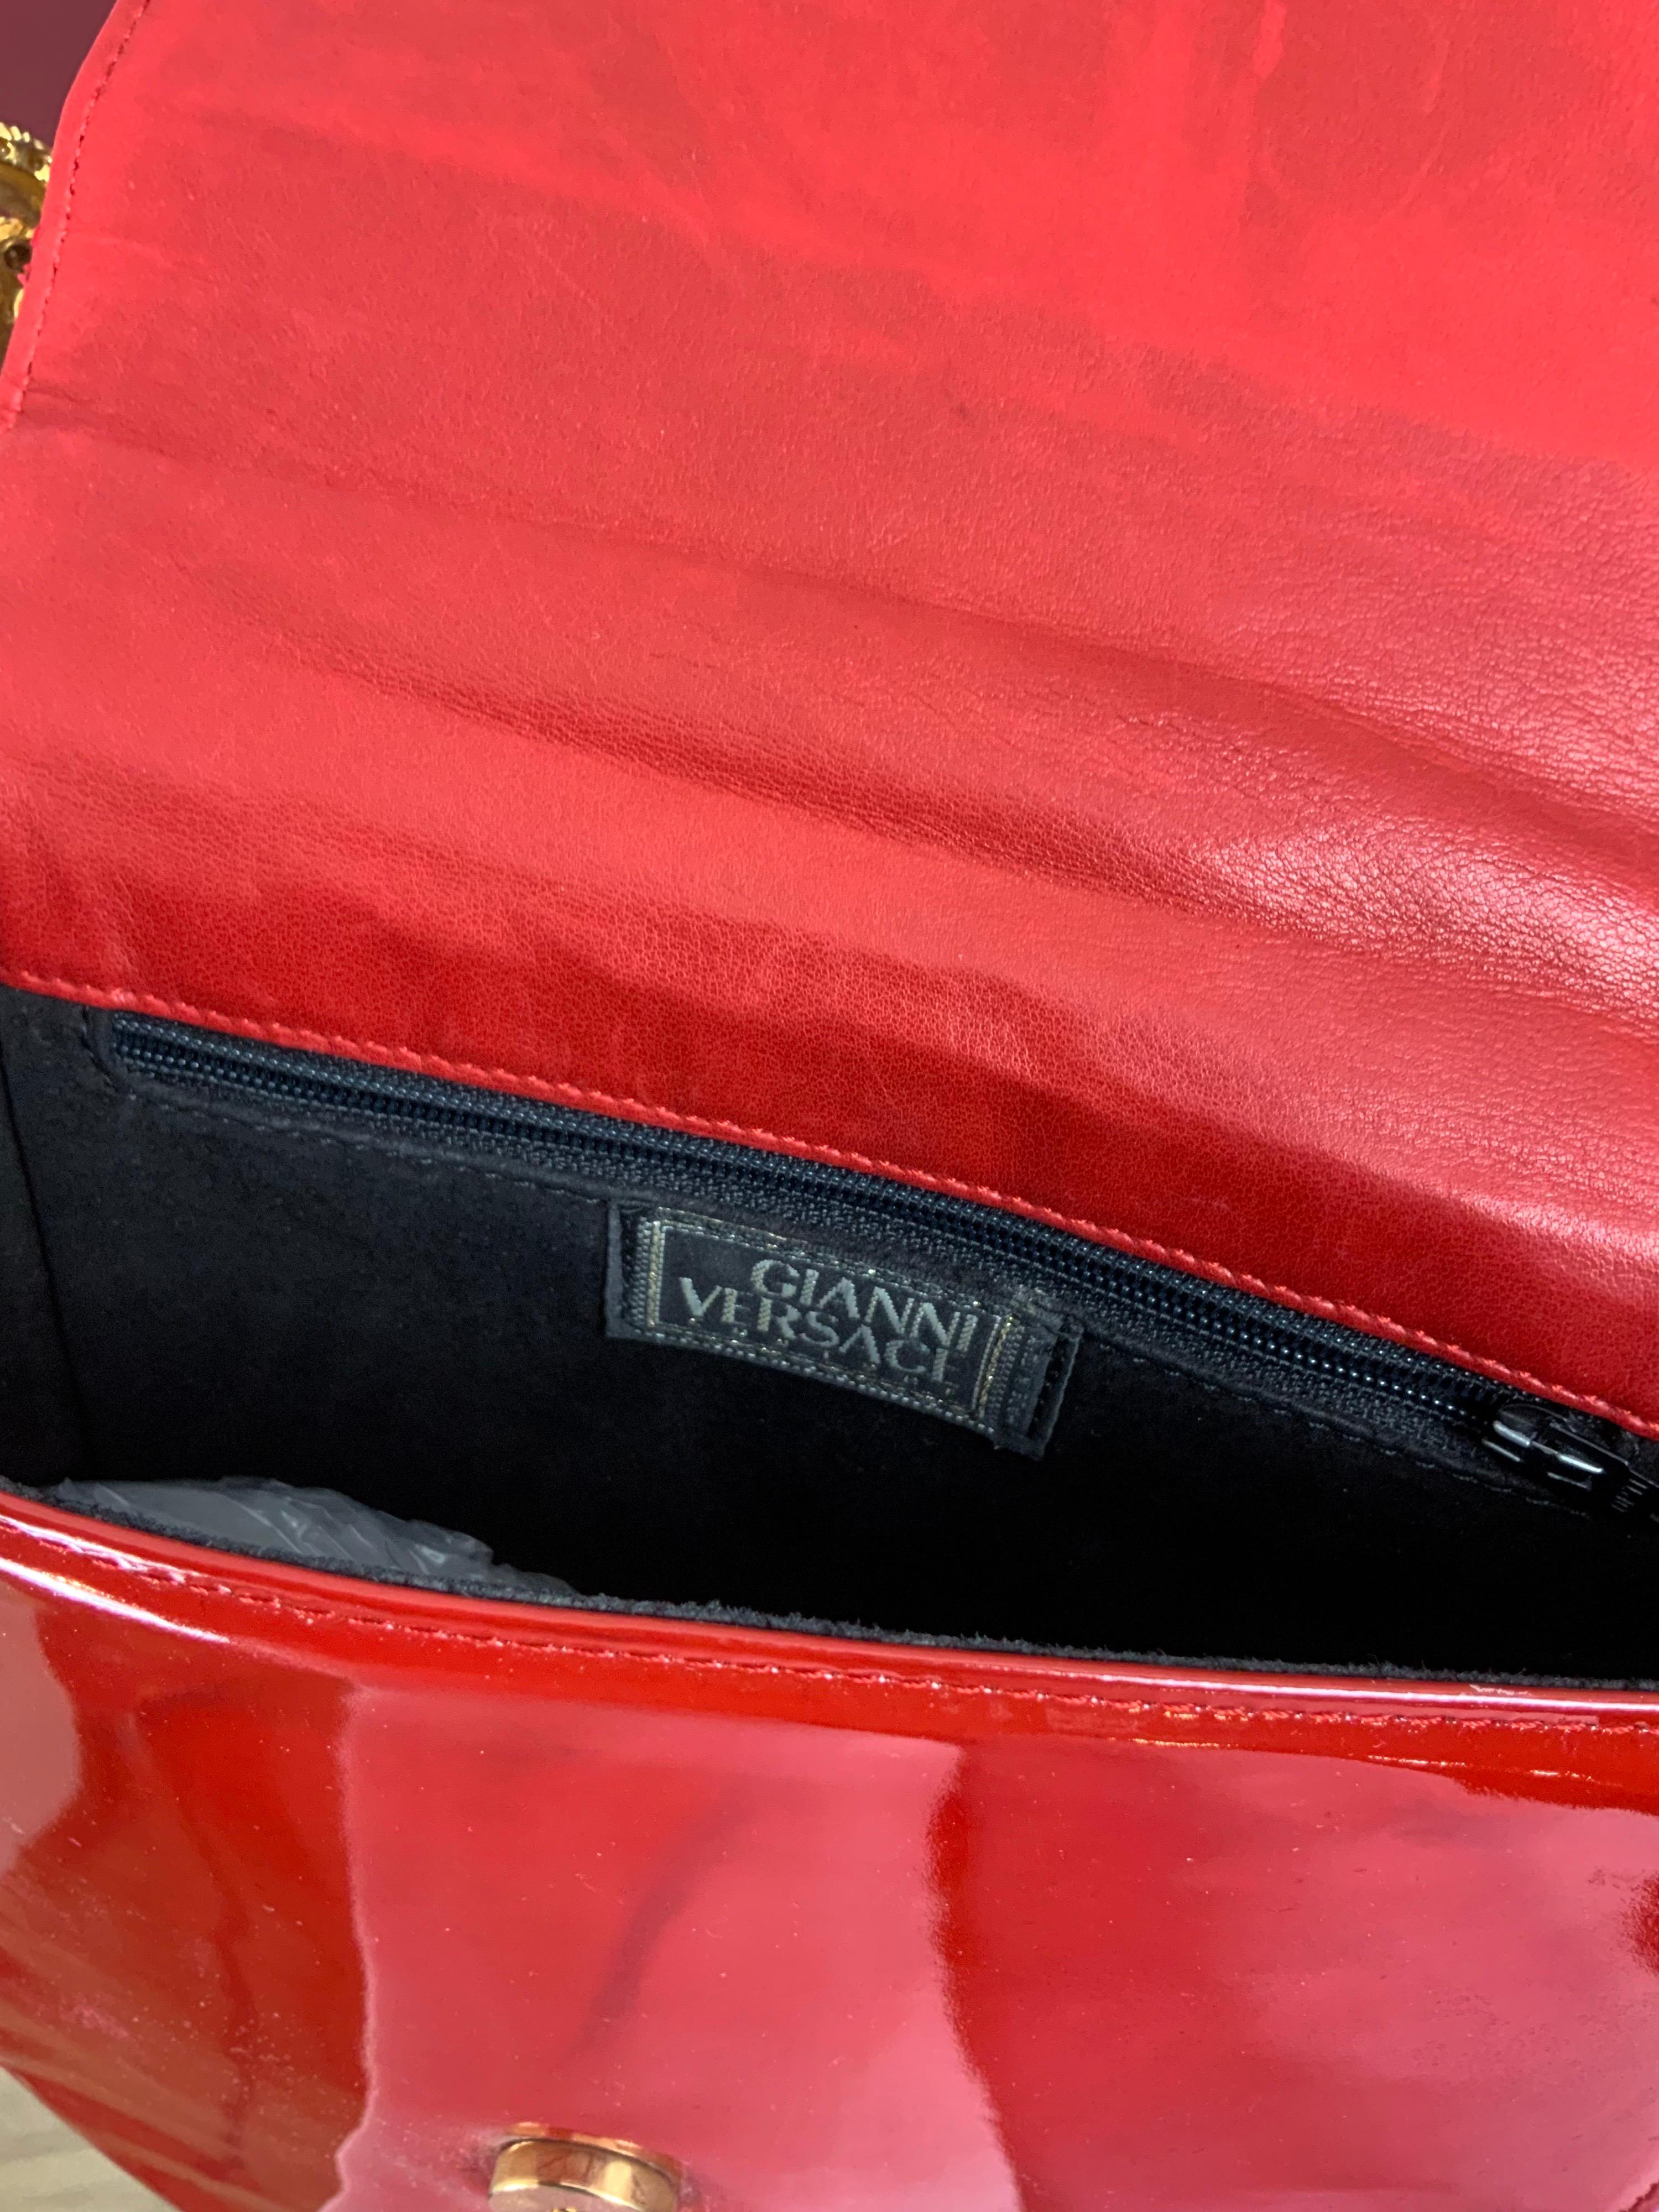 Red Gianni Versace red leather shoulder bag